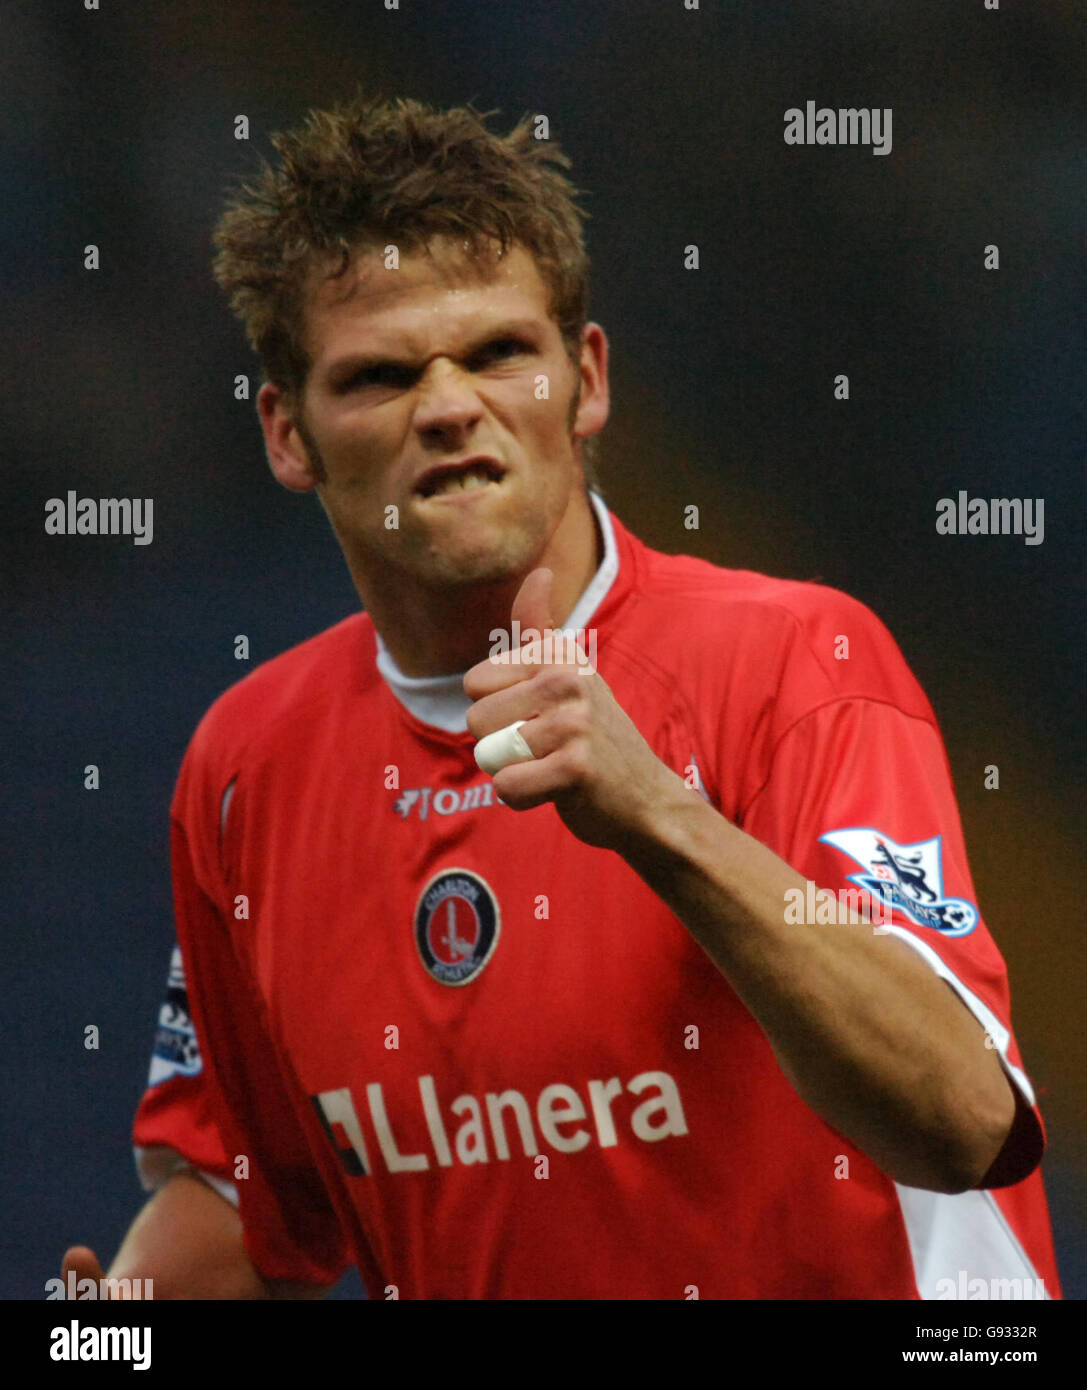 Charlton Athletic's Hermann Hreidersson gives the thumbs up Stock Photo